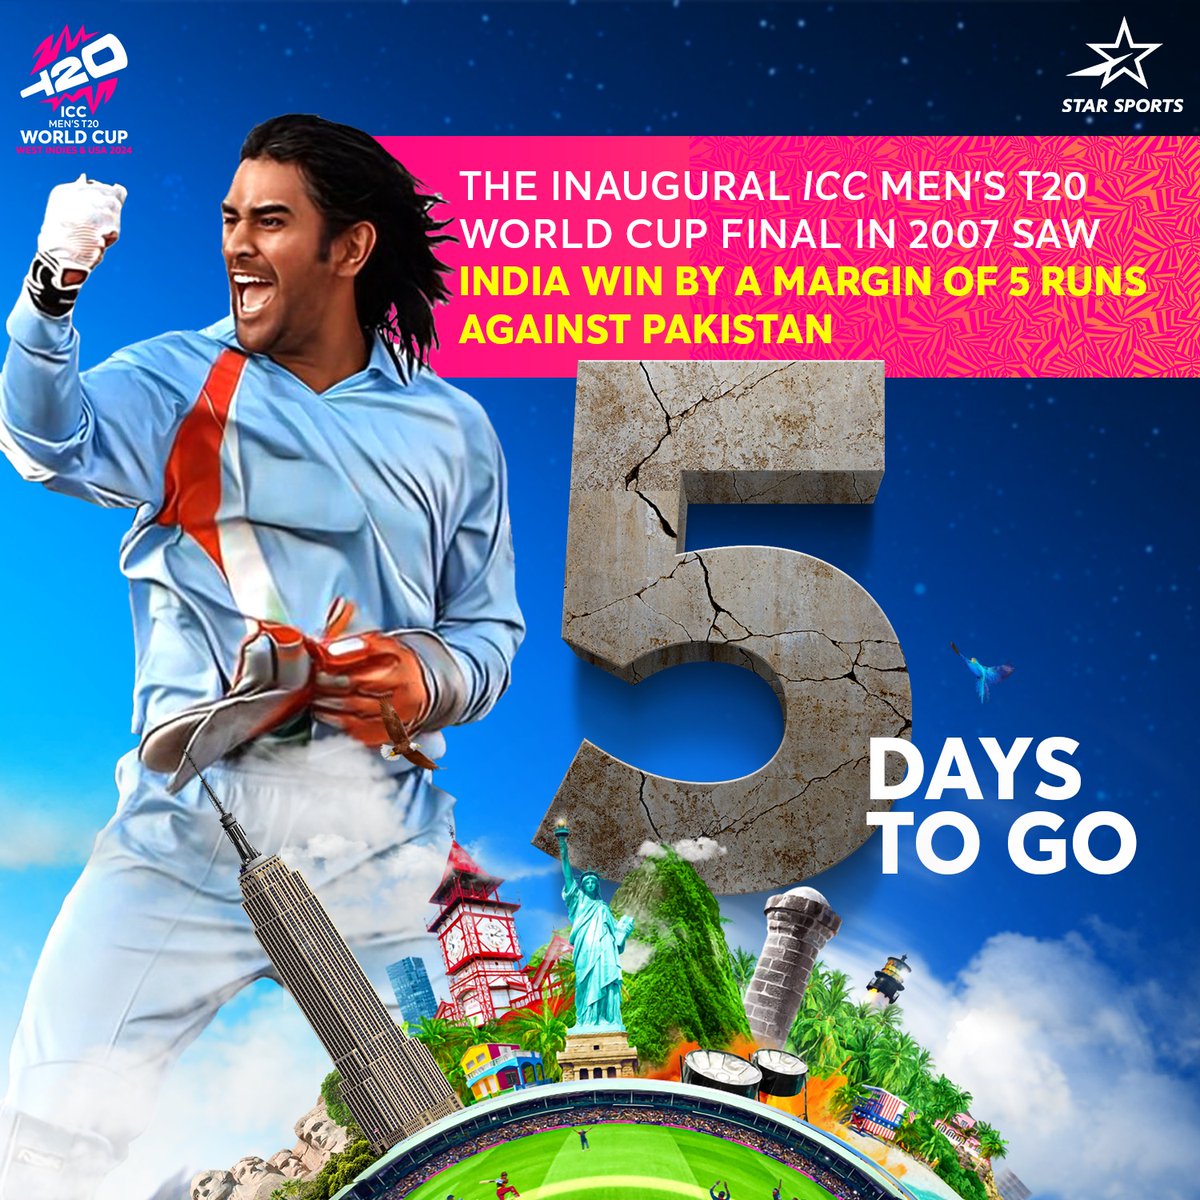 MS Dhoni poster by Star Sports in the Countdown for T20I World Cup. - The Greatest Captain ever. 🐐